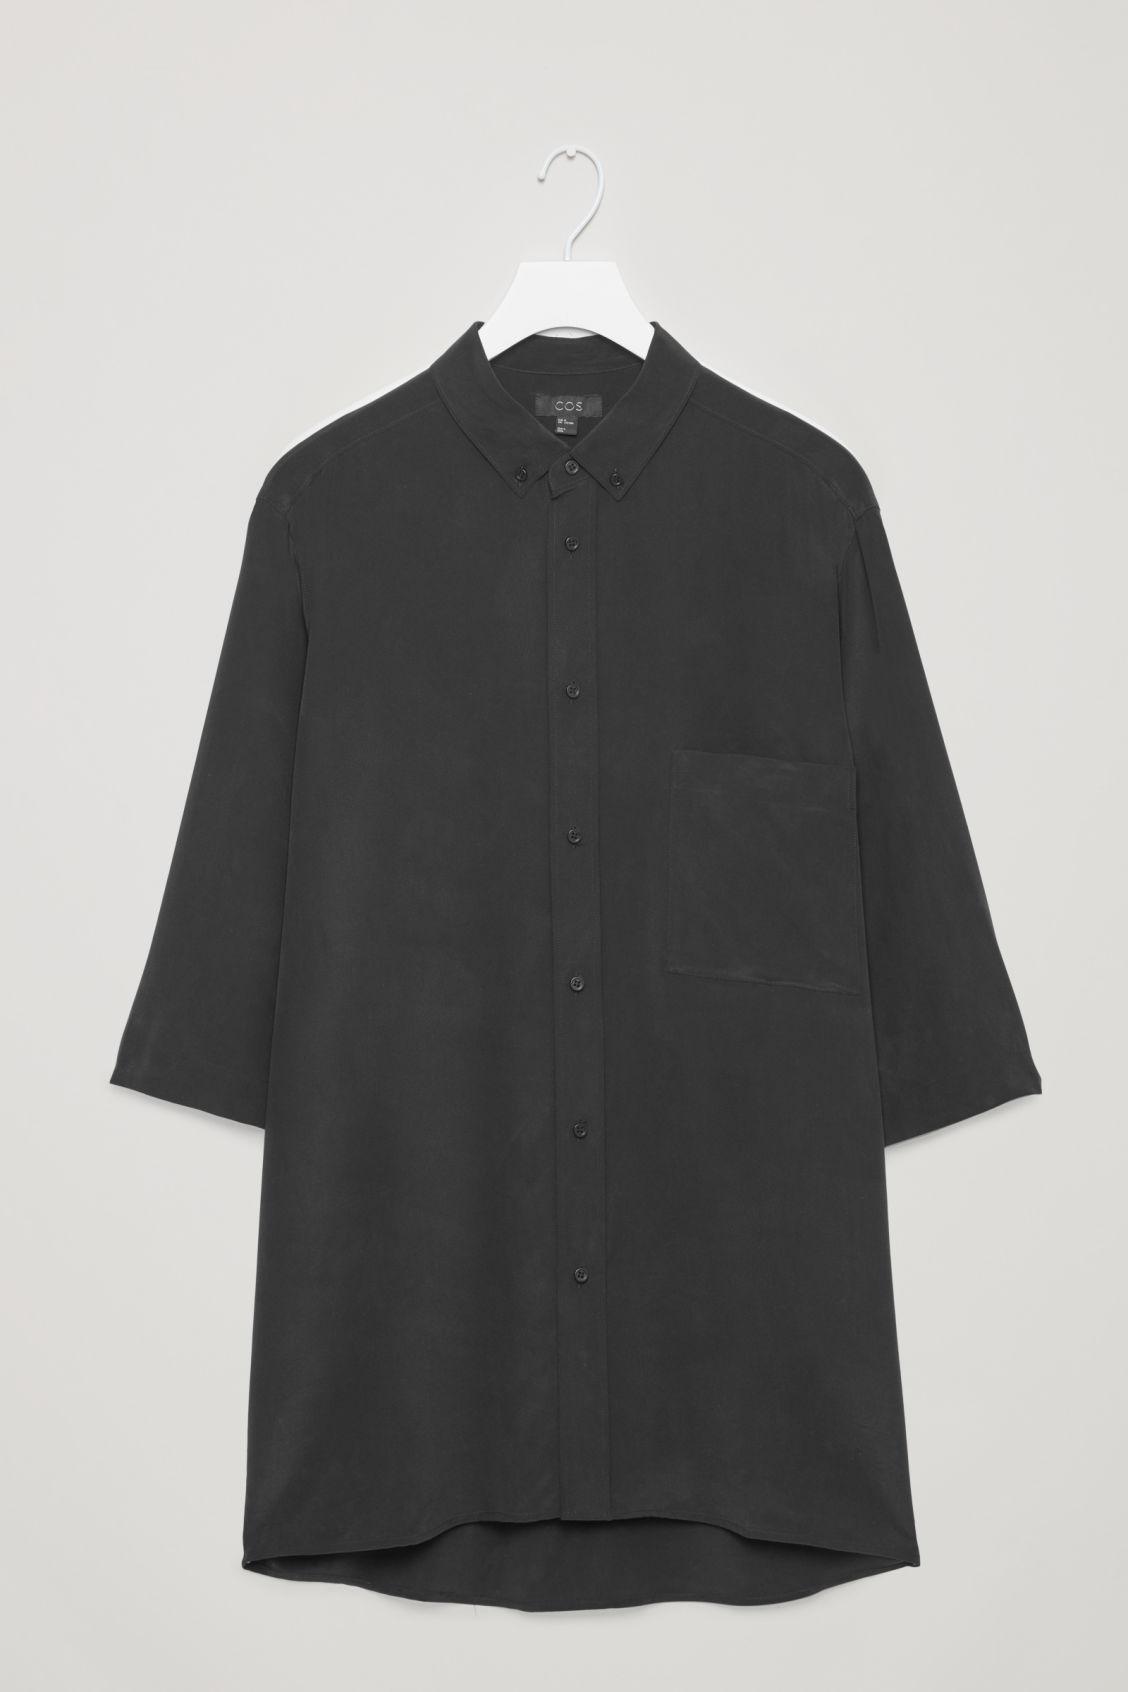 COS Silk Shirt With 3⁄4 Sleeves in Black for Men